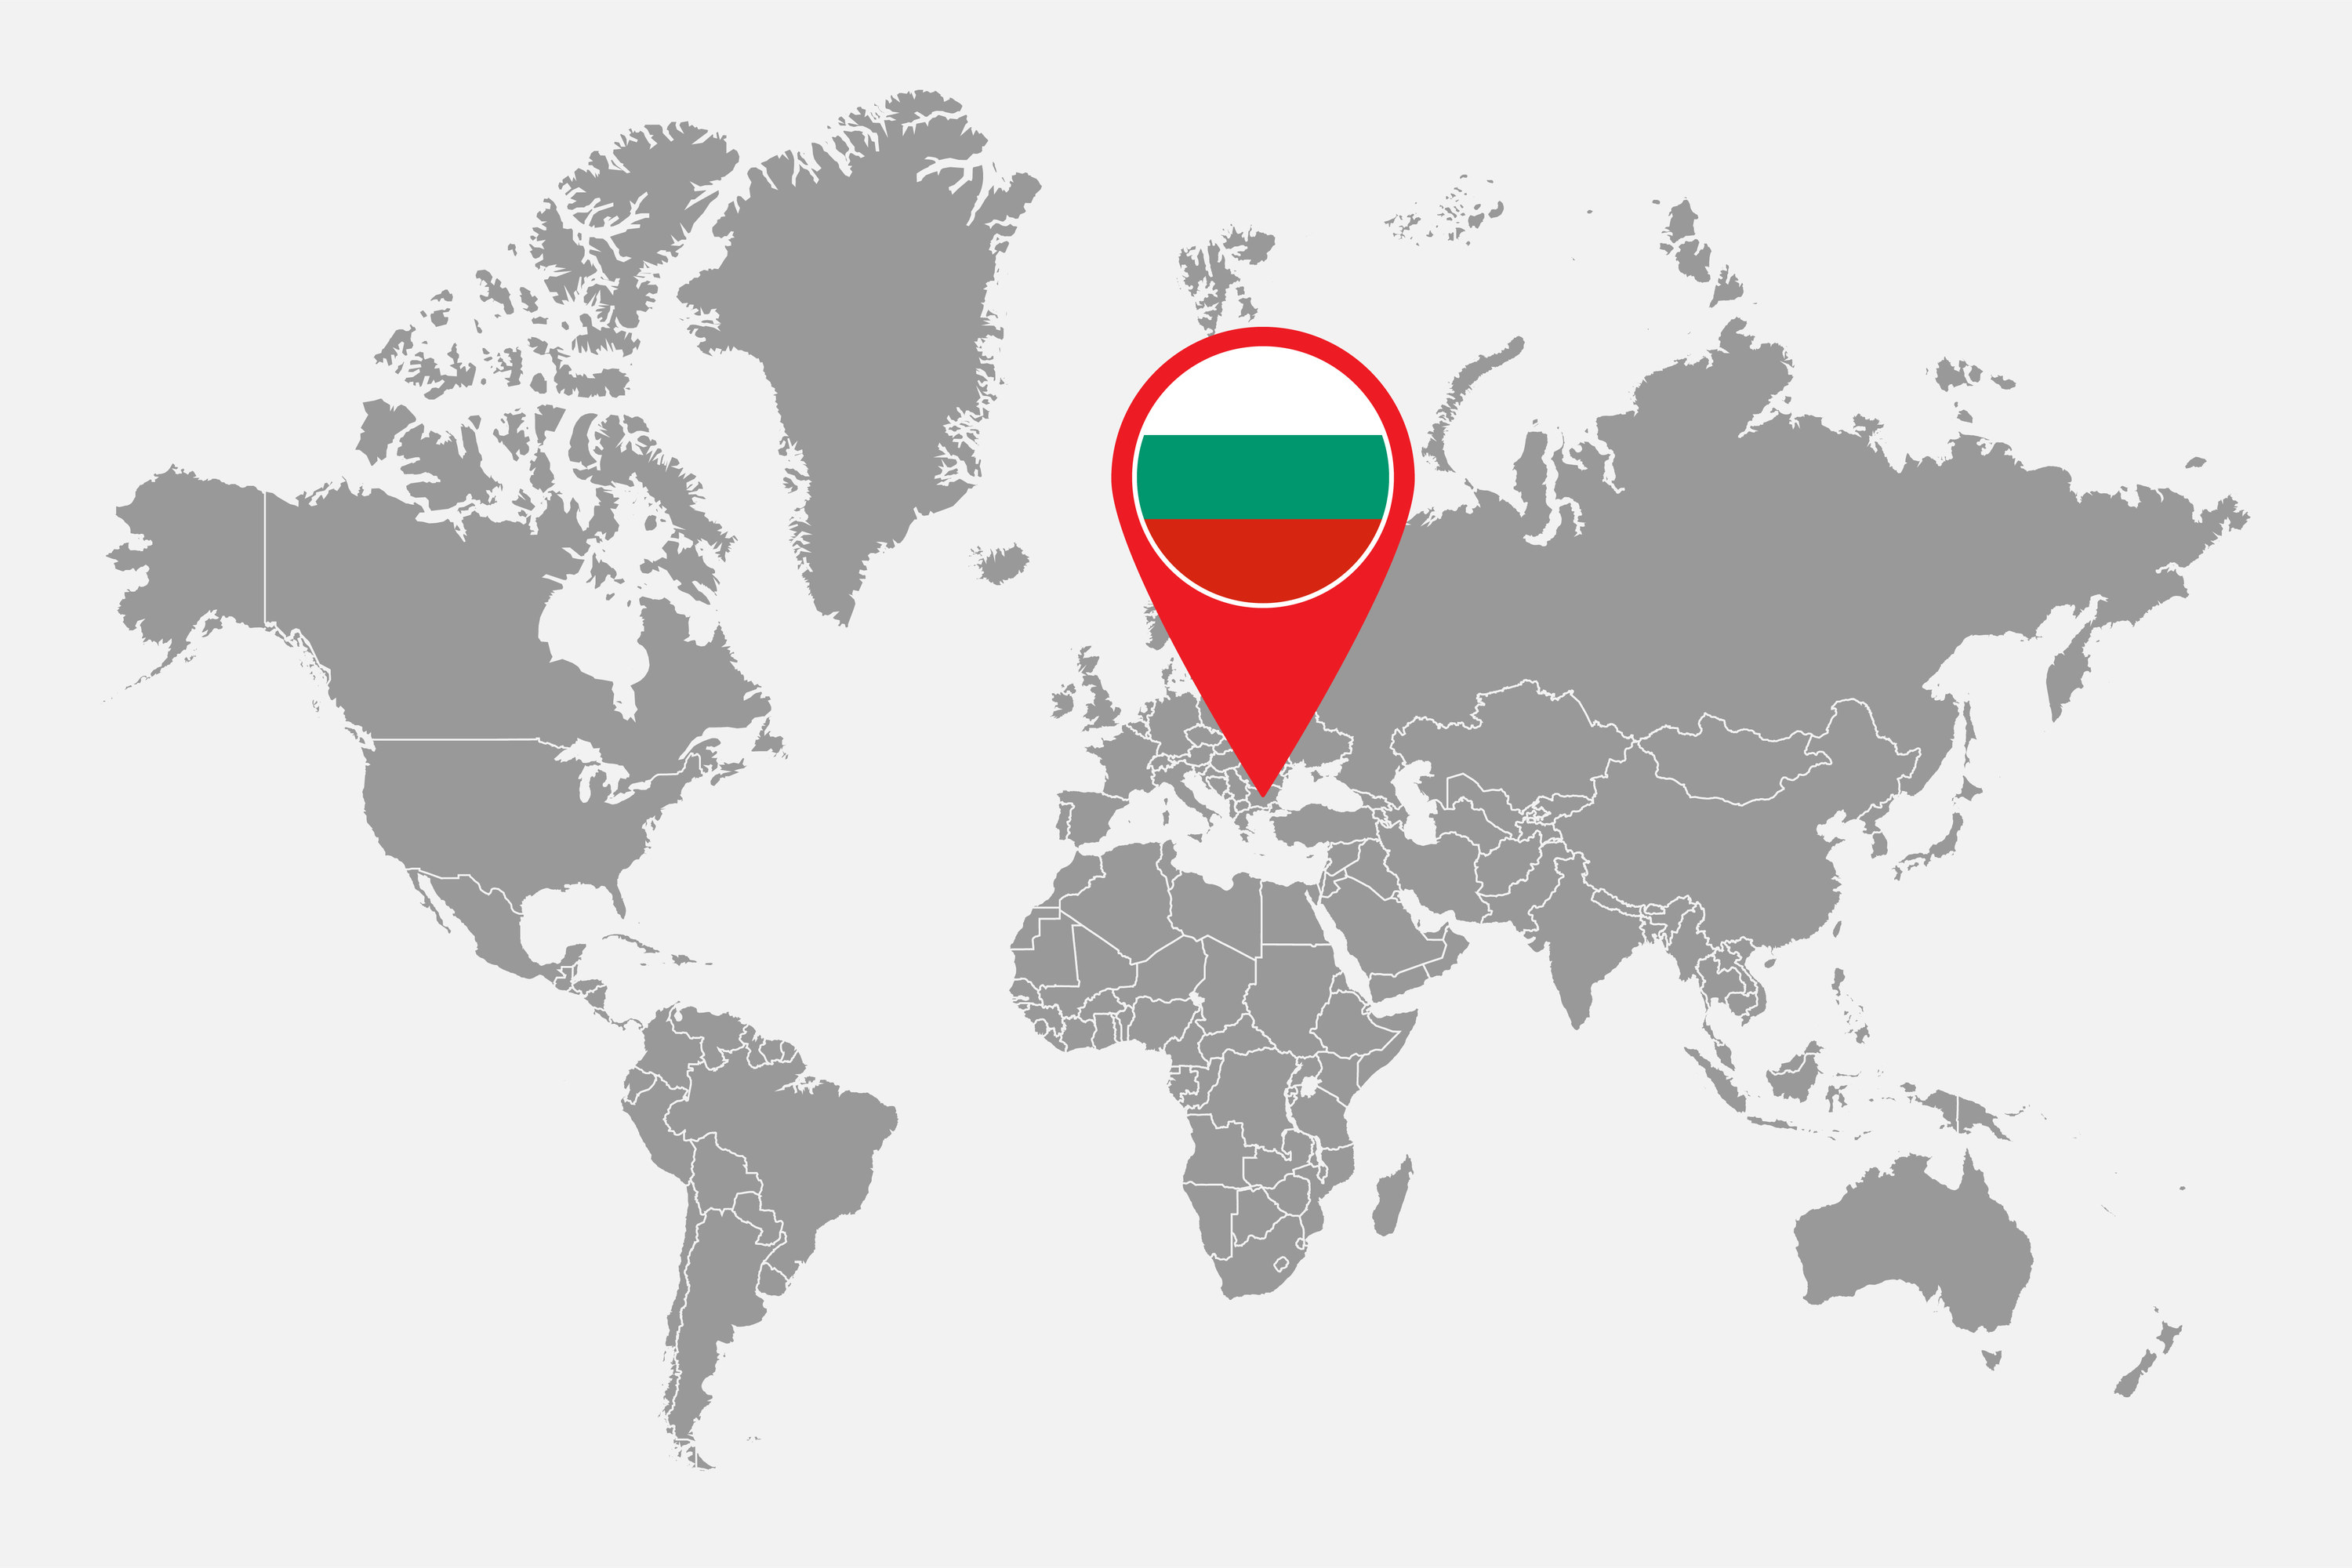 A world map with Bulgaria indicated